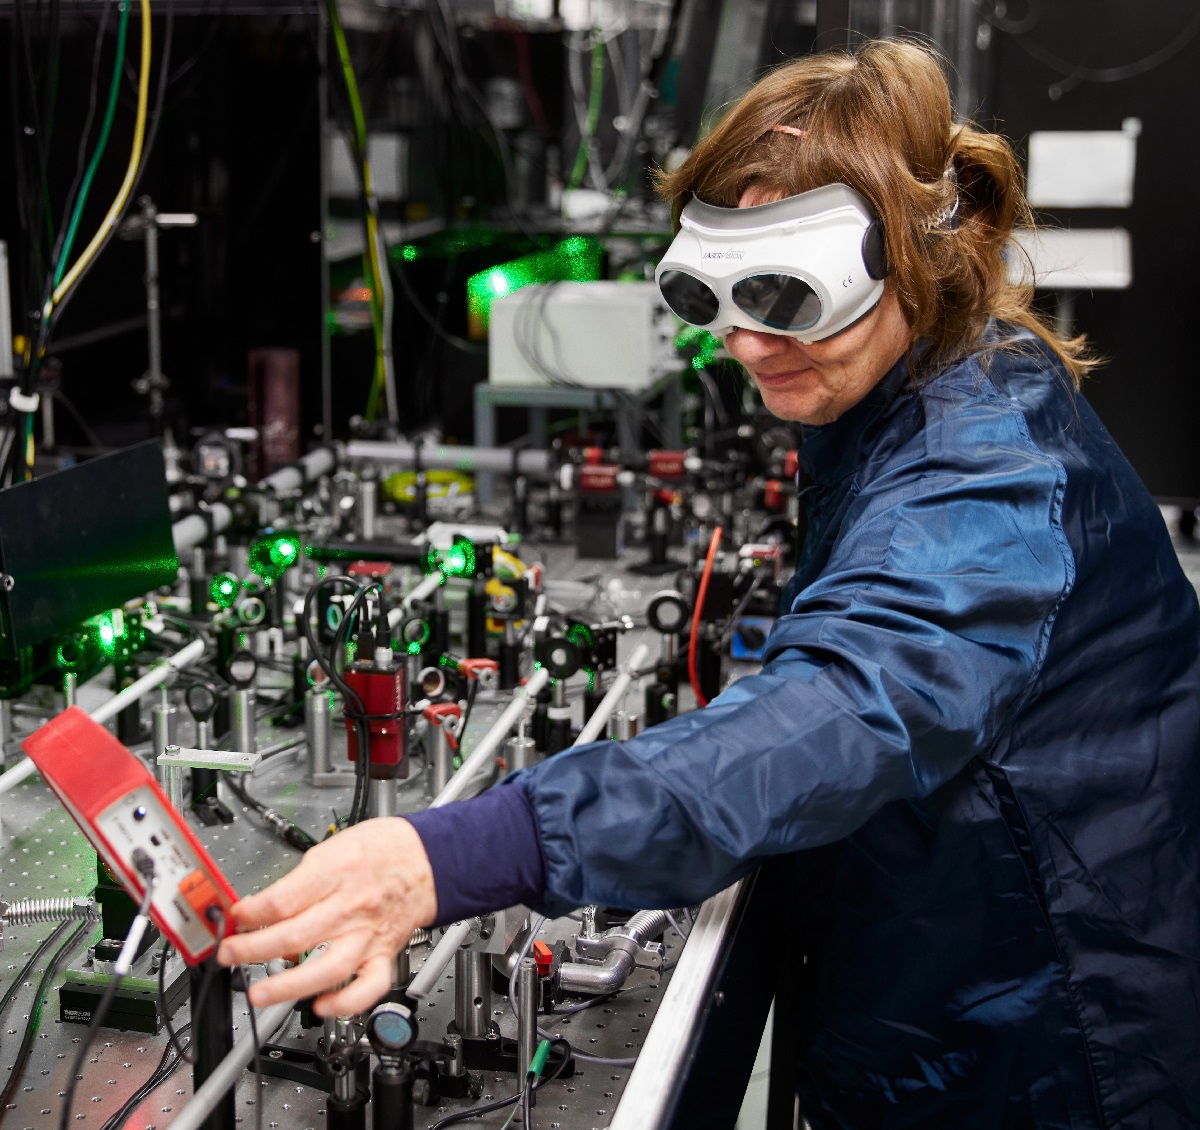 Victoria wearing a lab coat and laser goggles adjusting electronics in a Gemini lab.​